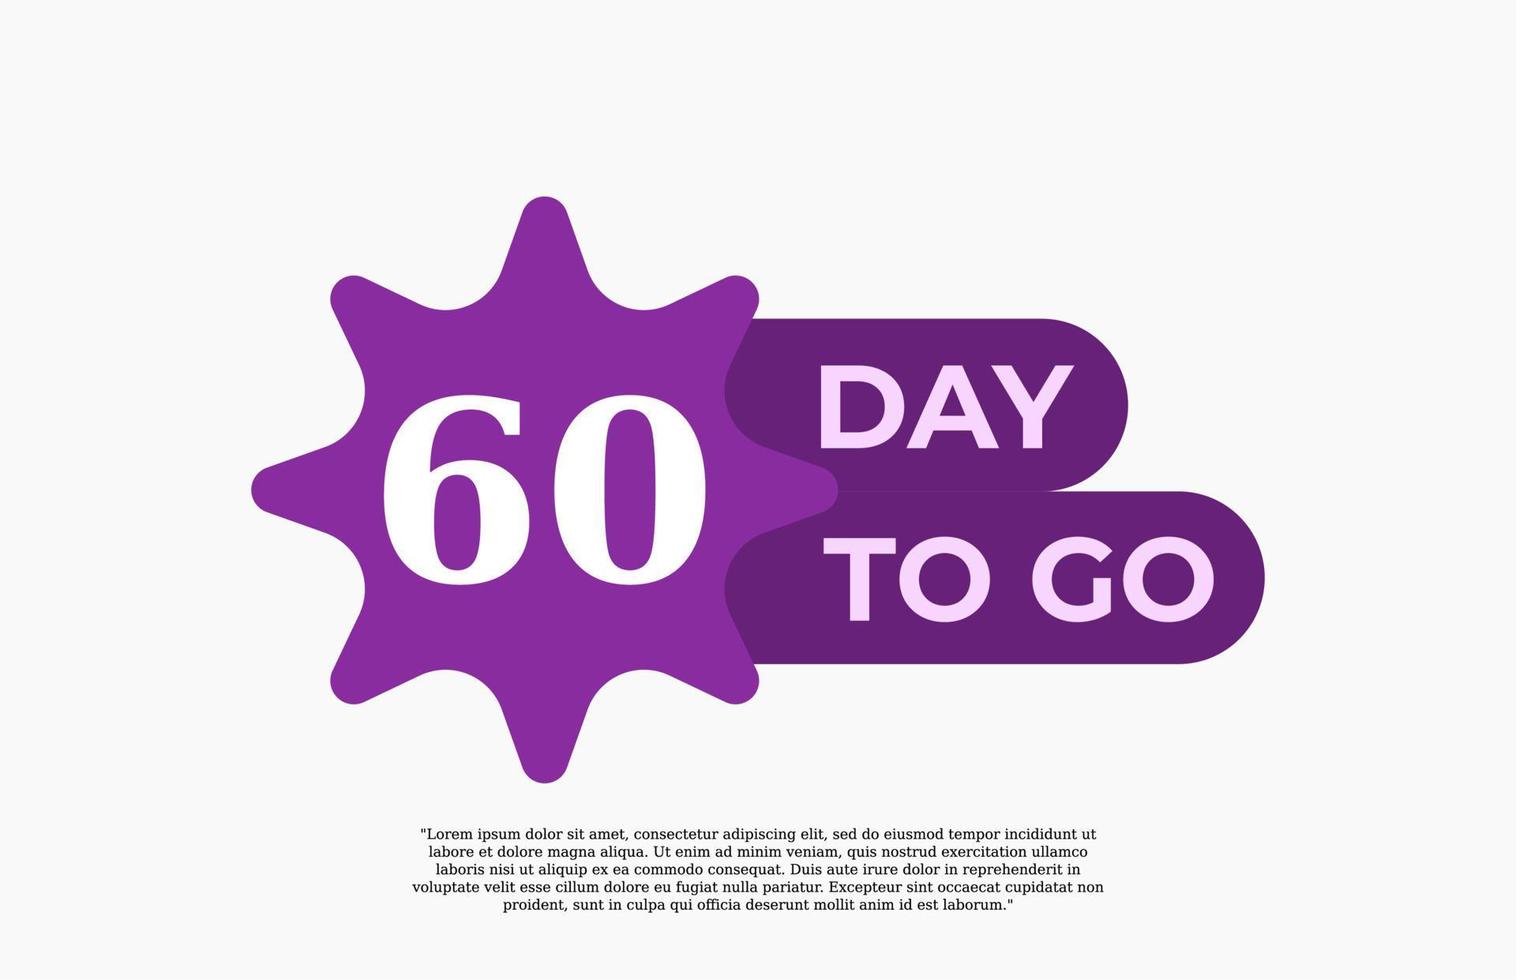 60 Day To Go. Offer sale business sign vector art illustration with fantastic font and nice purple white color